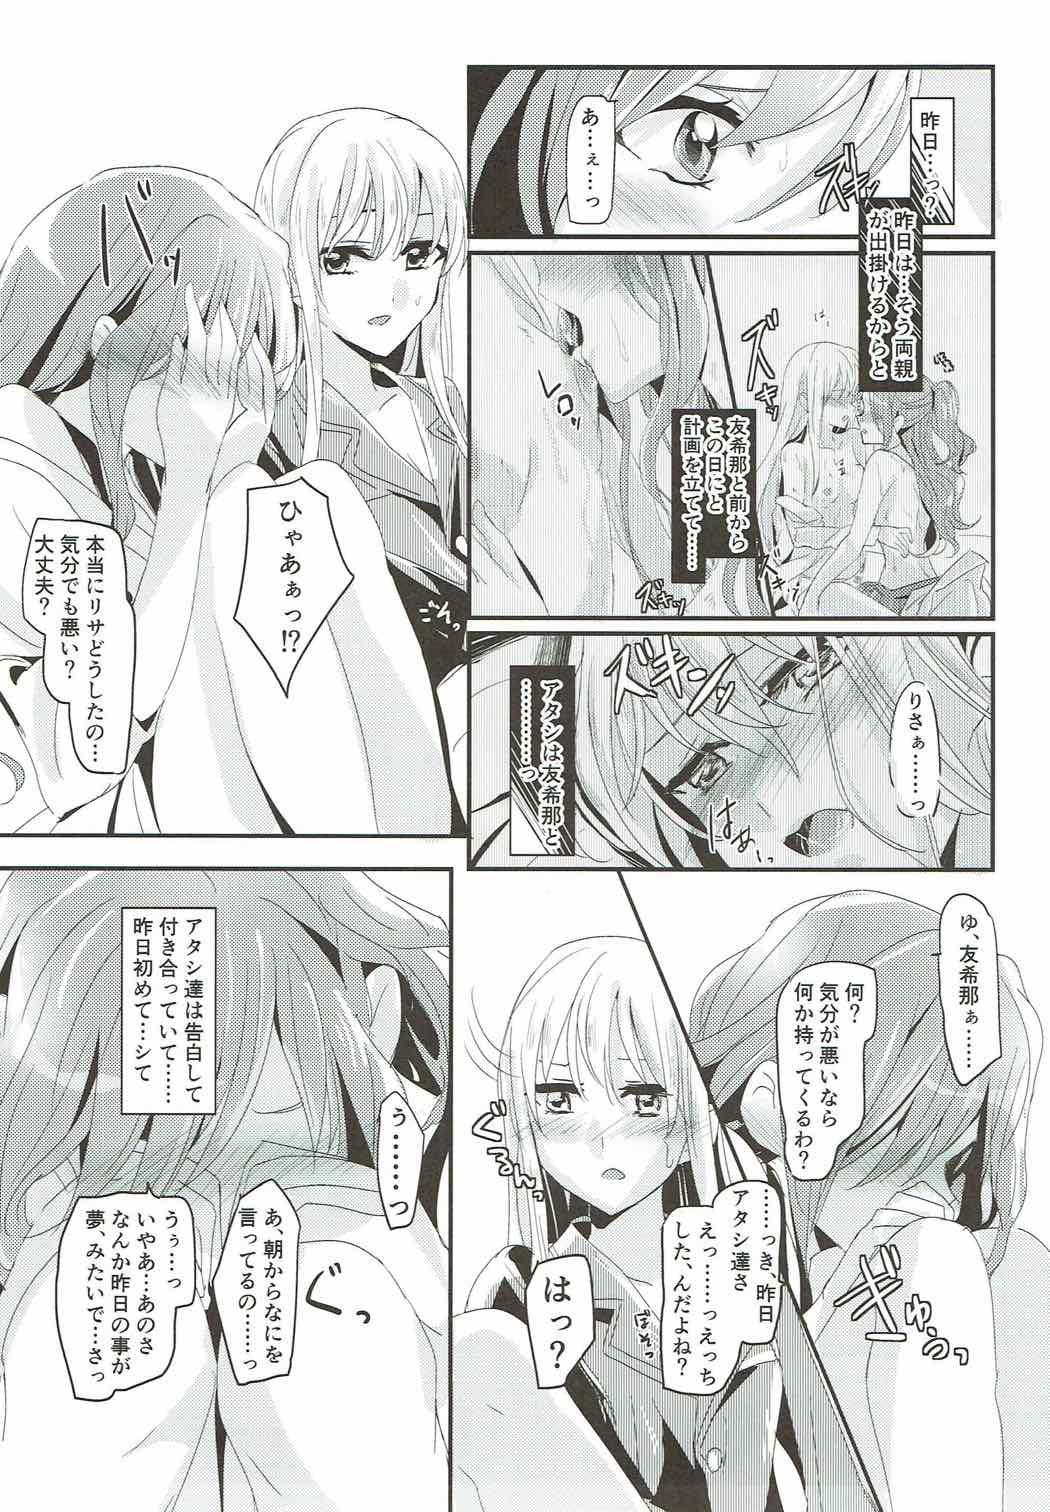 Pussylicking Unstable feelings - Bang dream Calcinha - Page 6